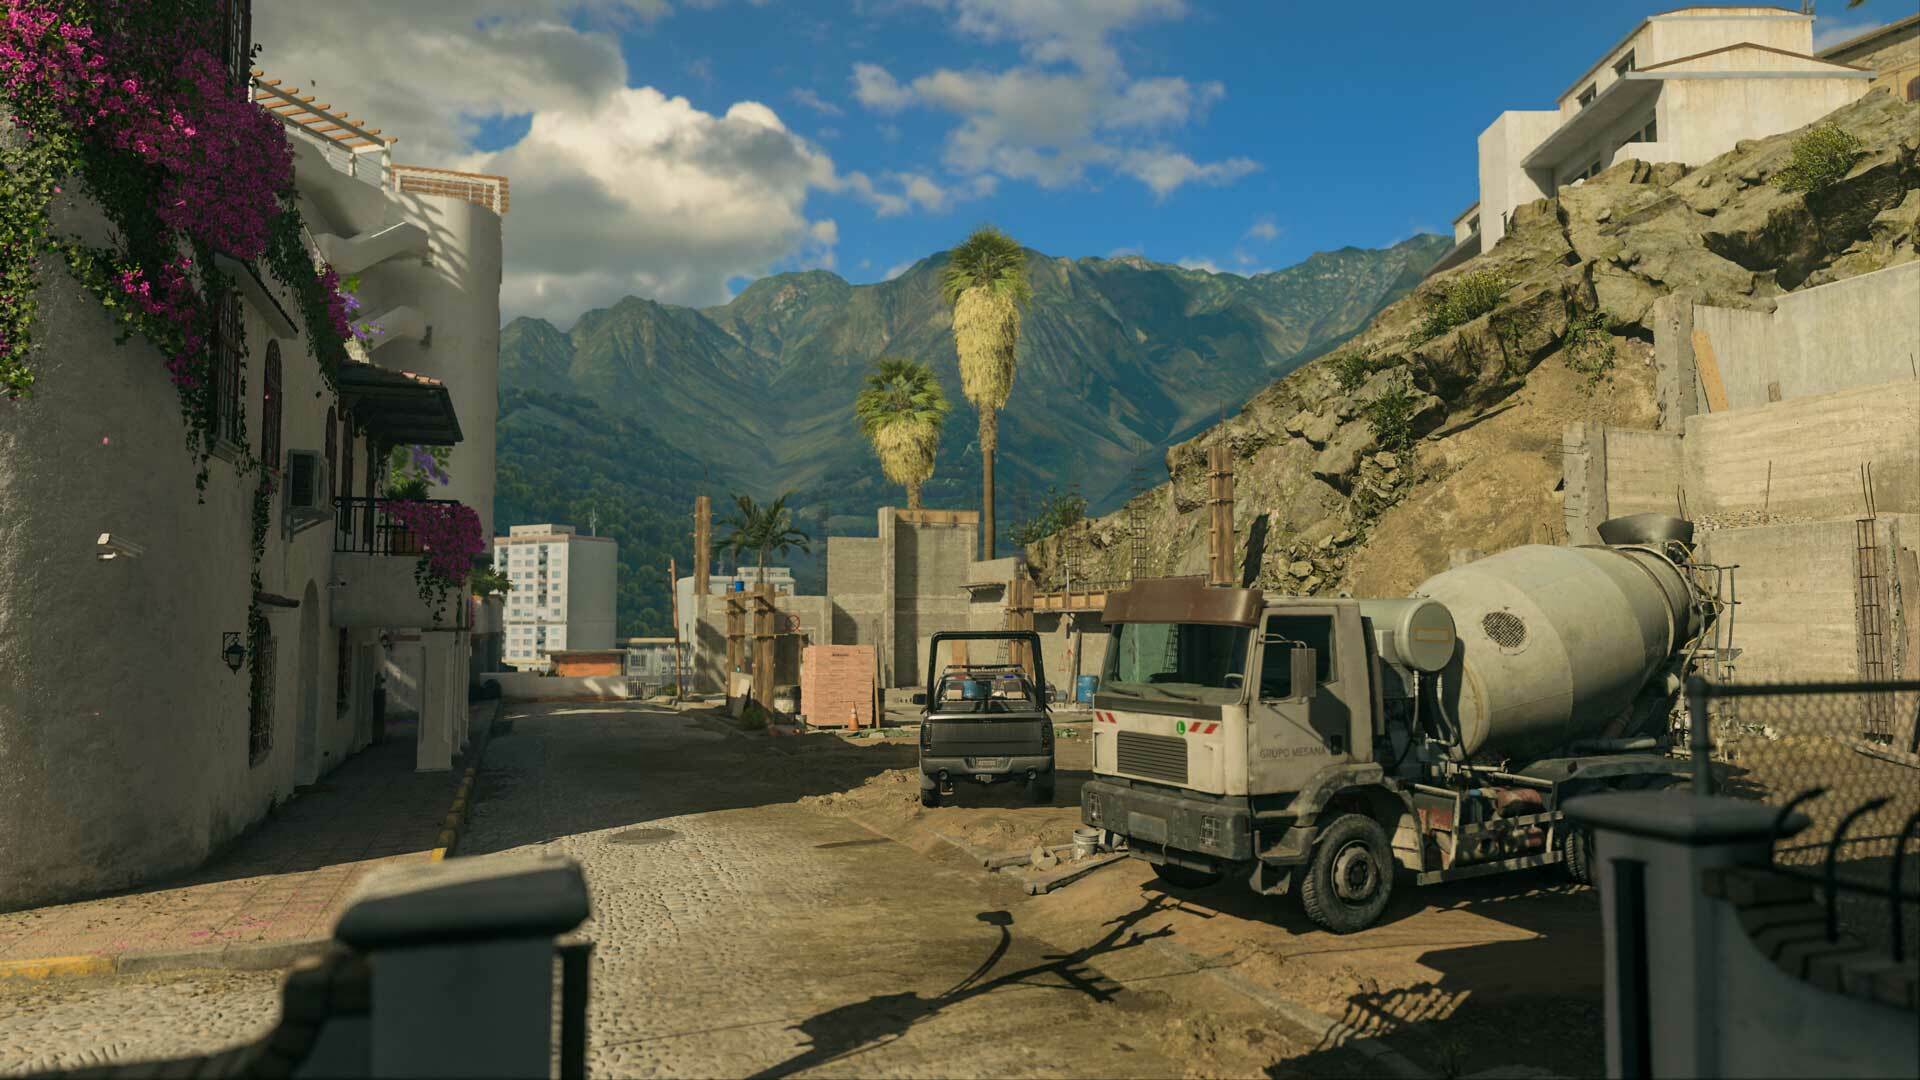 Modern Warfare 3 will feature the largest Zombies map ever - Xfire